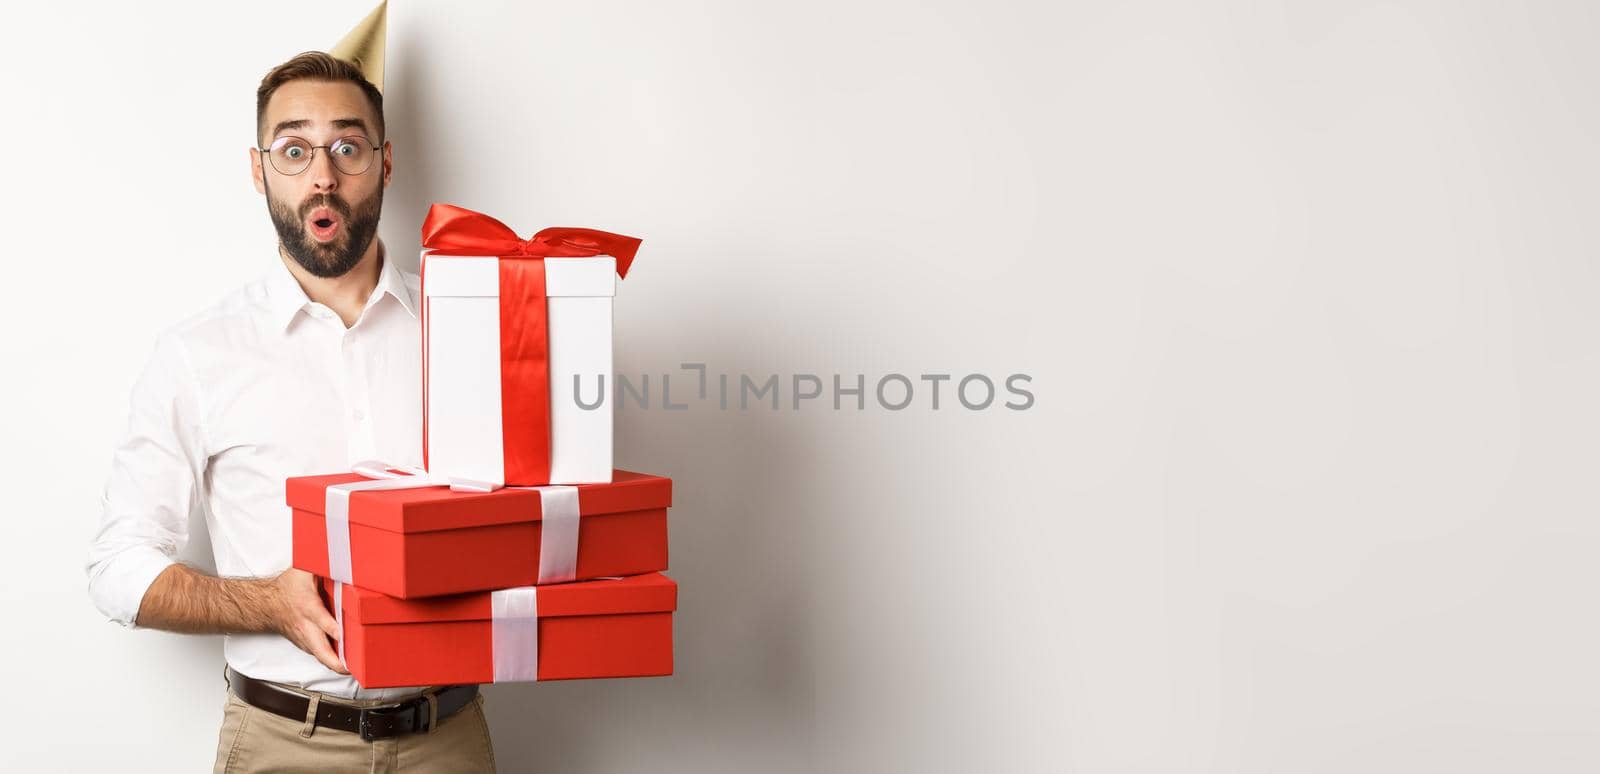 Holidays and celebration. Happy man receiving gifts on birthday, holding presents and looking excited, standing over white background.